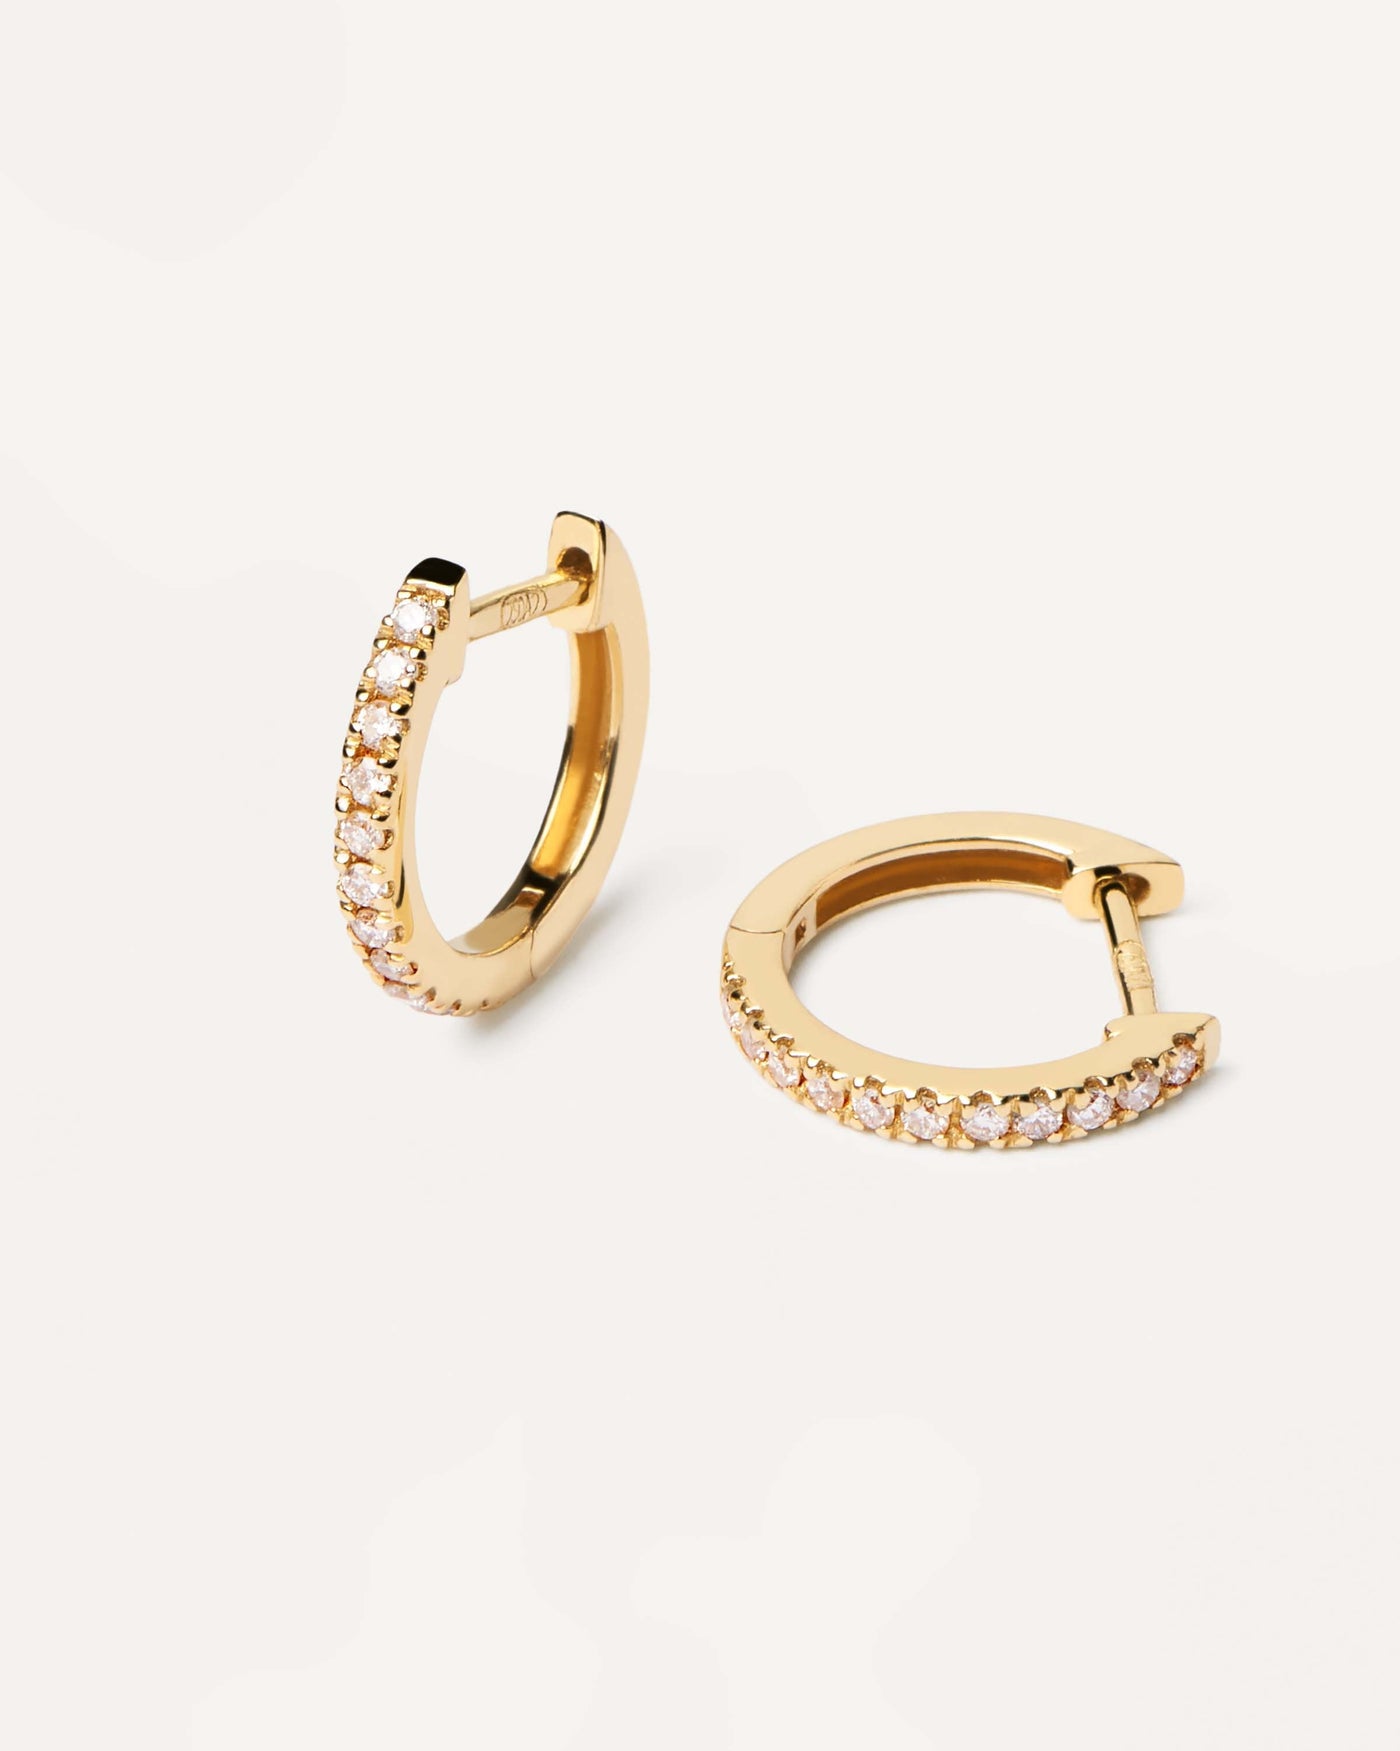 2024 Selection | Diamonds and Gold Eternity Mini Hoops. Small 18K yellow gold hoop earrings, set with lab-grown diamonds of 0.18 carats in total. Get the latest arrival from PDPAOLA. Place your order safely and get this Best Seller. Free Shipping.